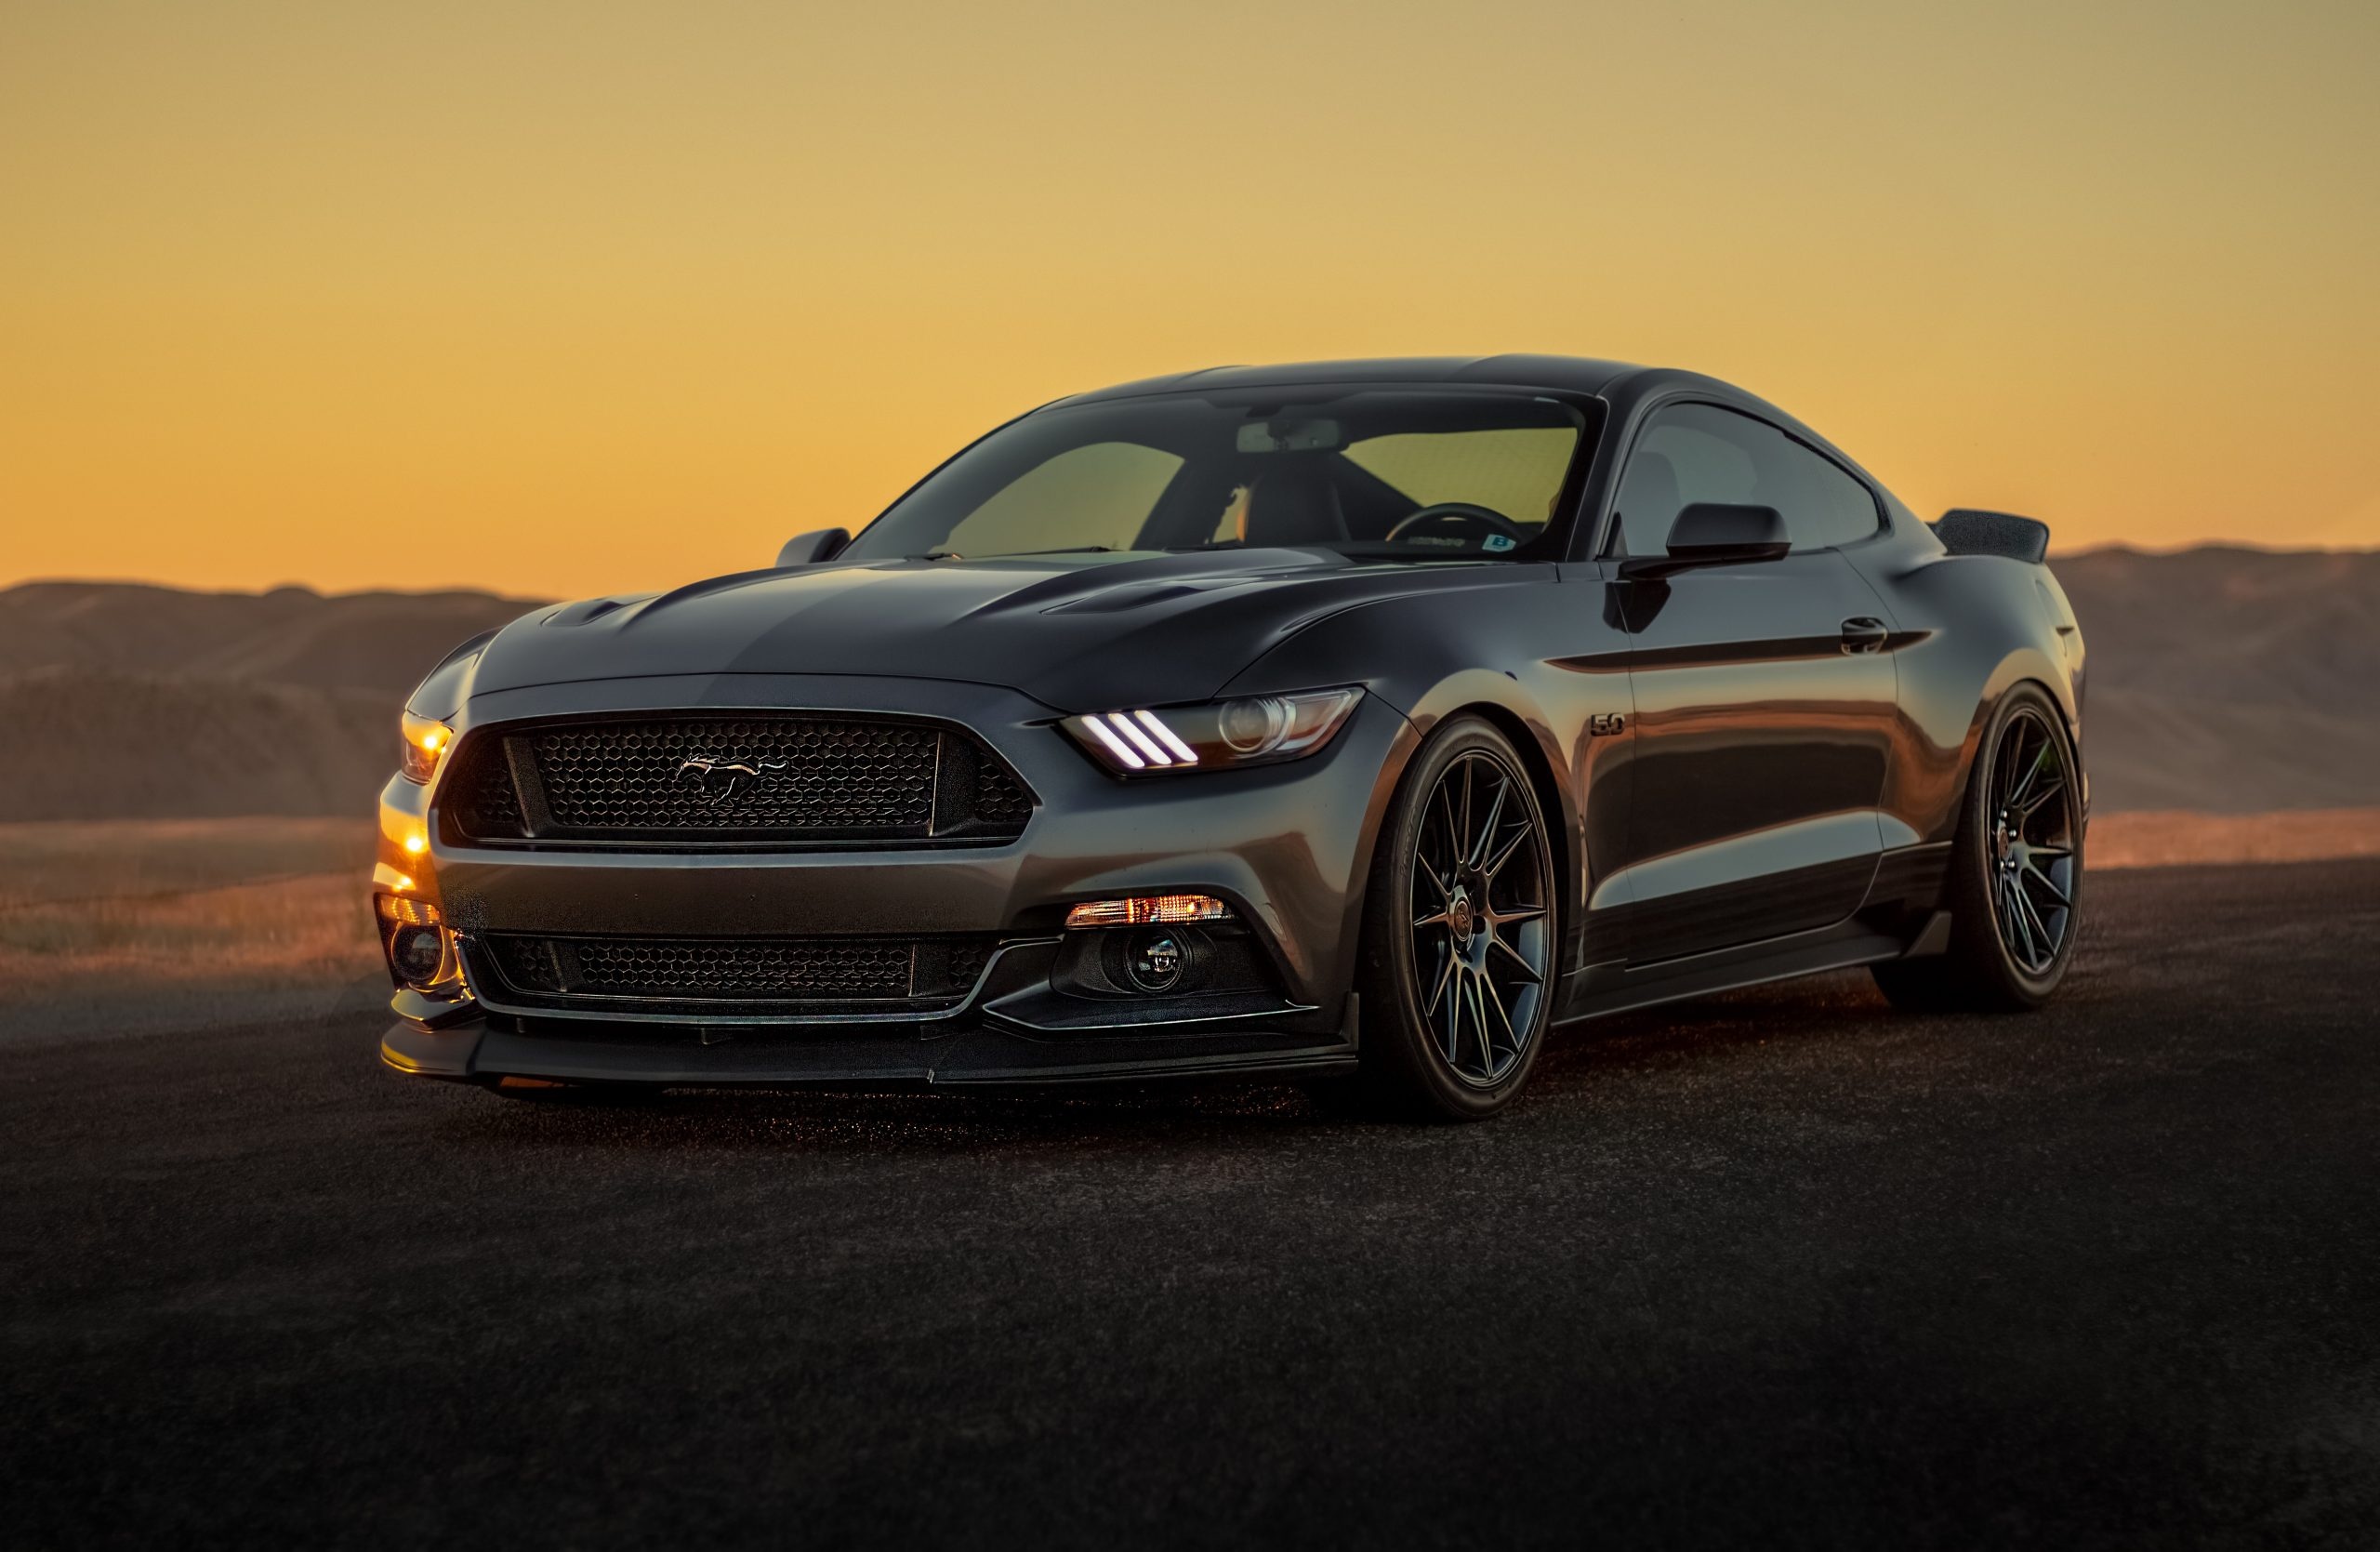 Sports car imagery, American muscle, Mustang admiration, Downloadable visuals, Automotive beauty, 2560x1670 HD Desktop